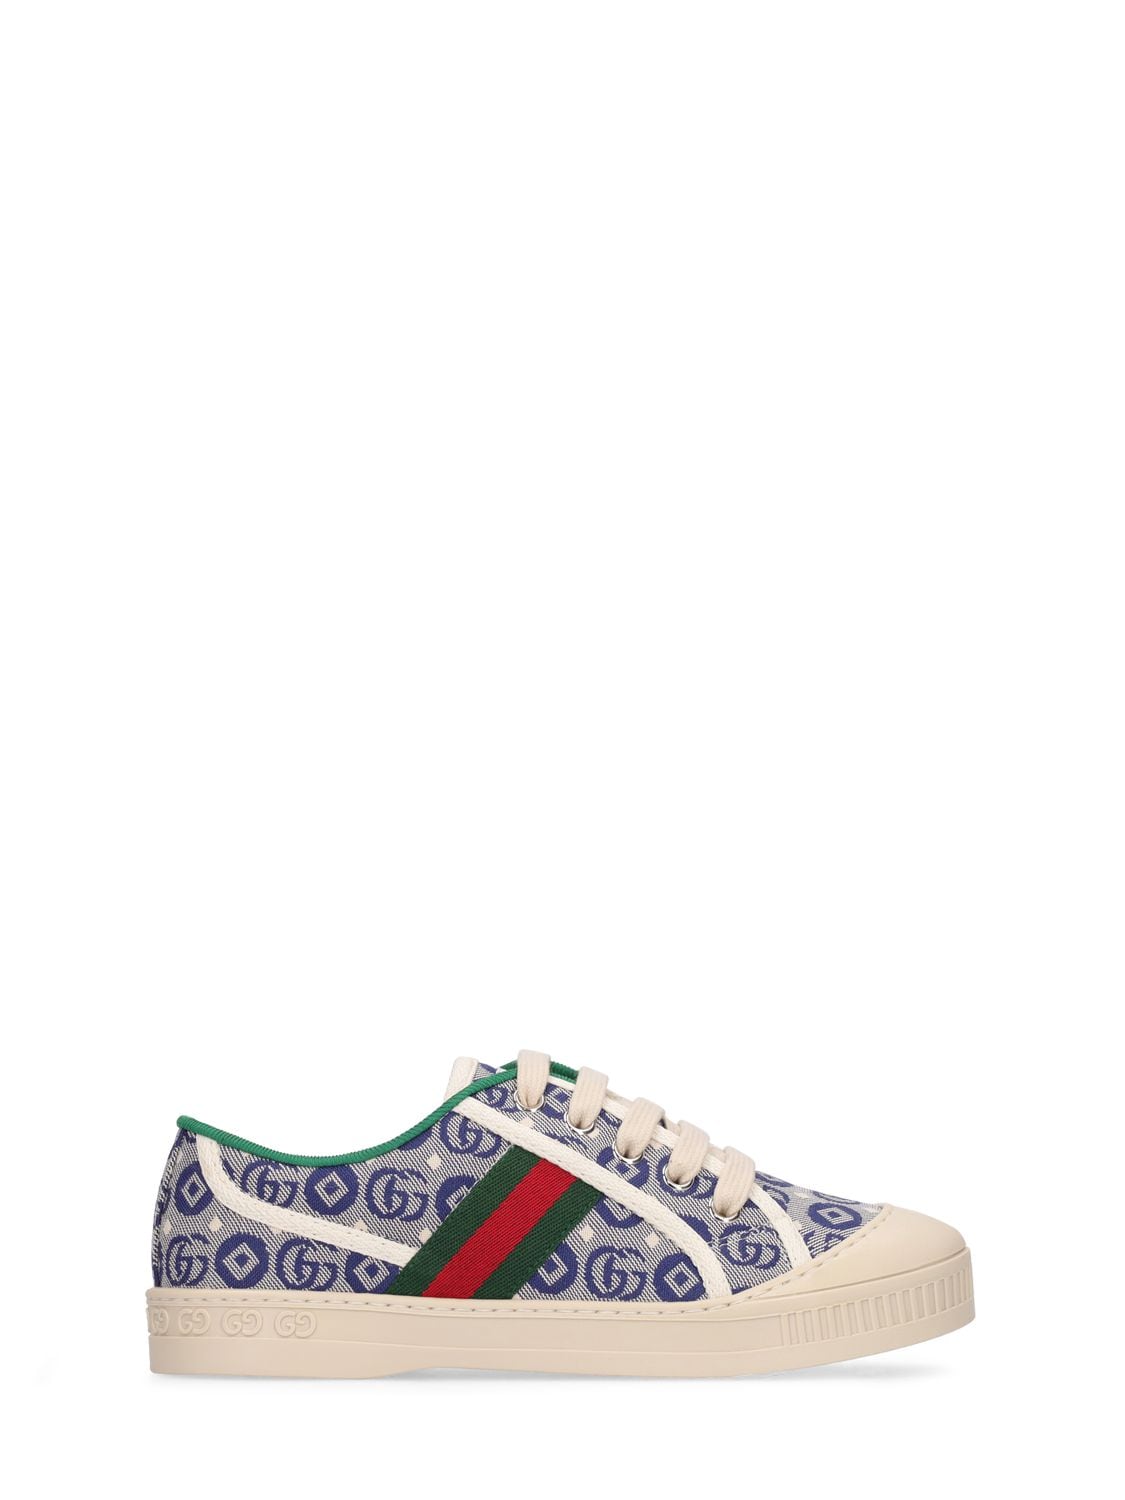 Gucci Kids' Tennis 1977 Label Trainers In Blue,white